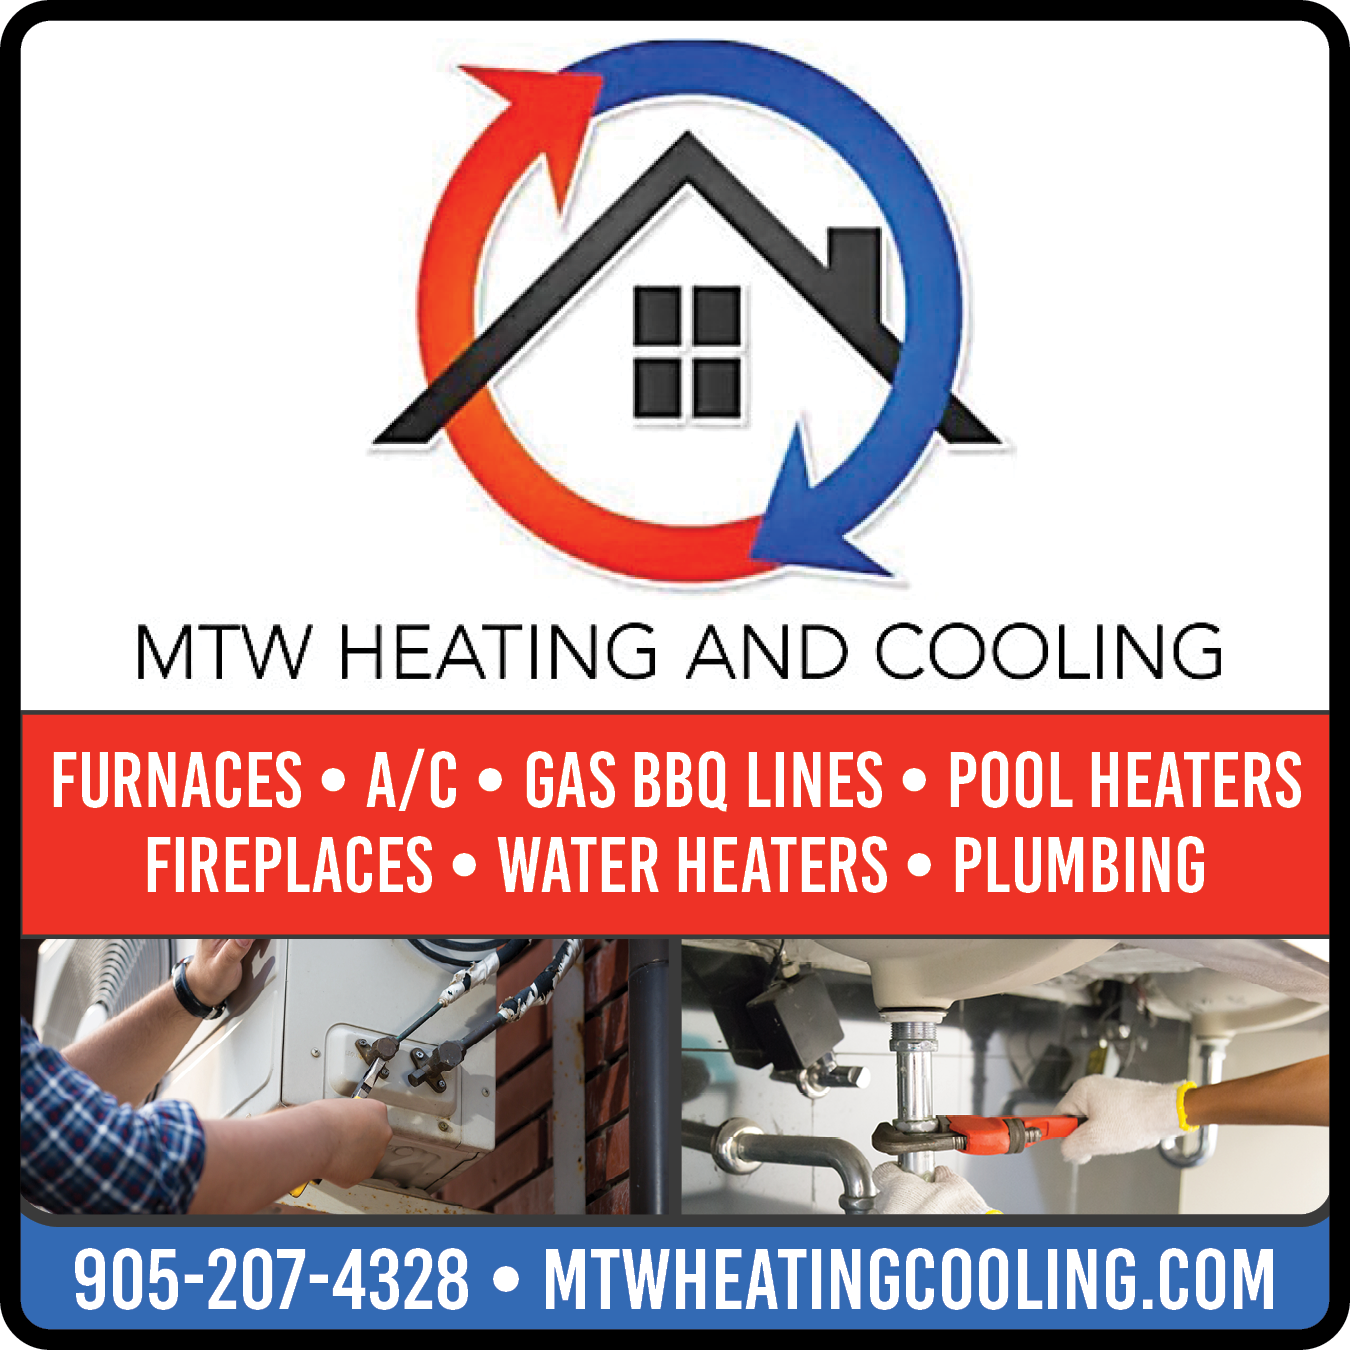 MWT Heating and Cooling